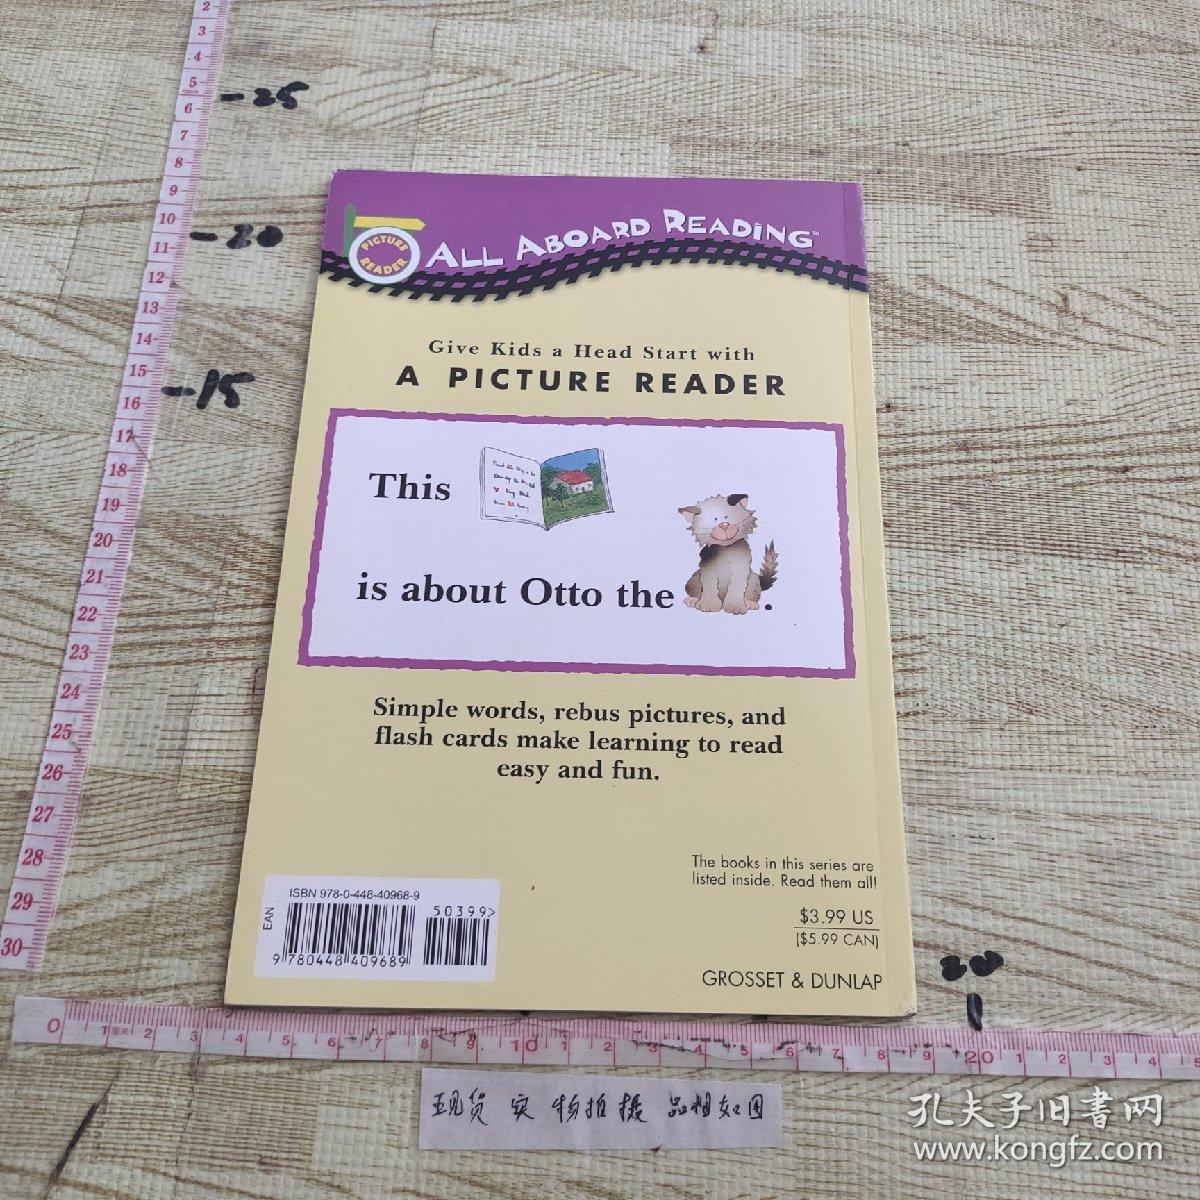 Picture Reader - Otto the Cat图片阅读器-奥托猫9780448409689